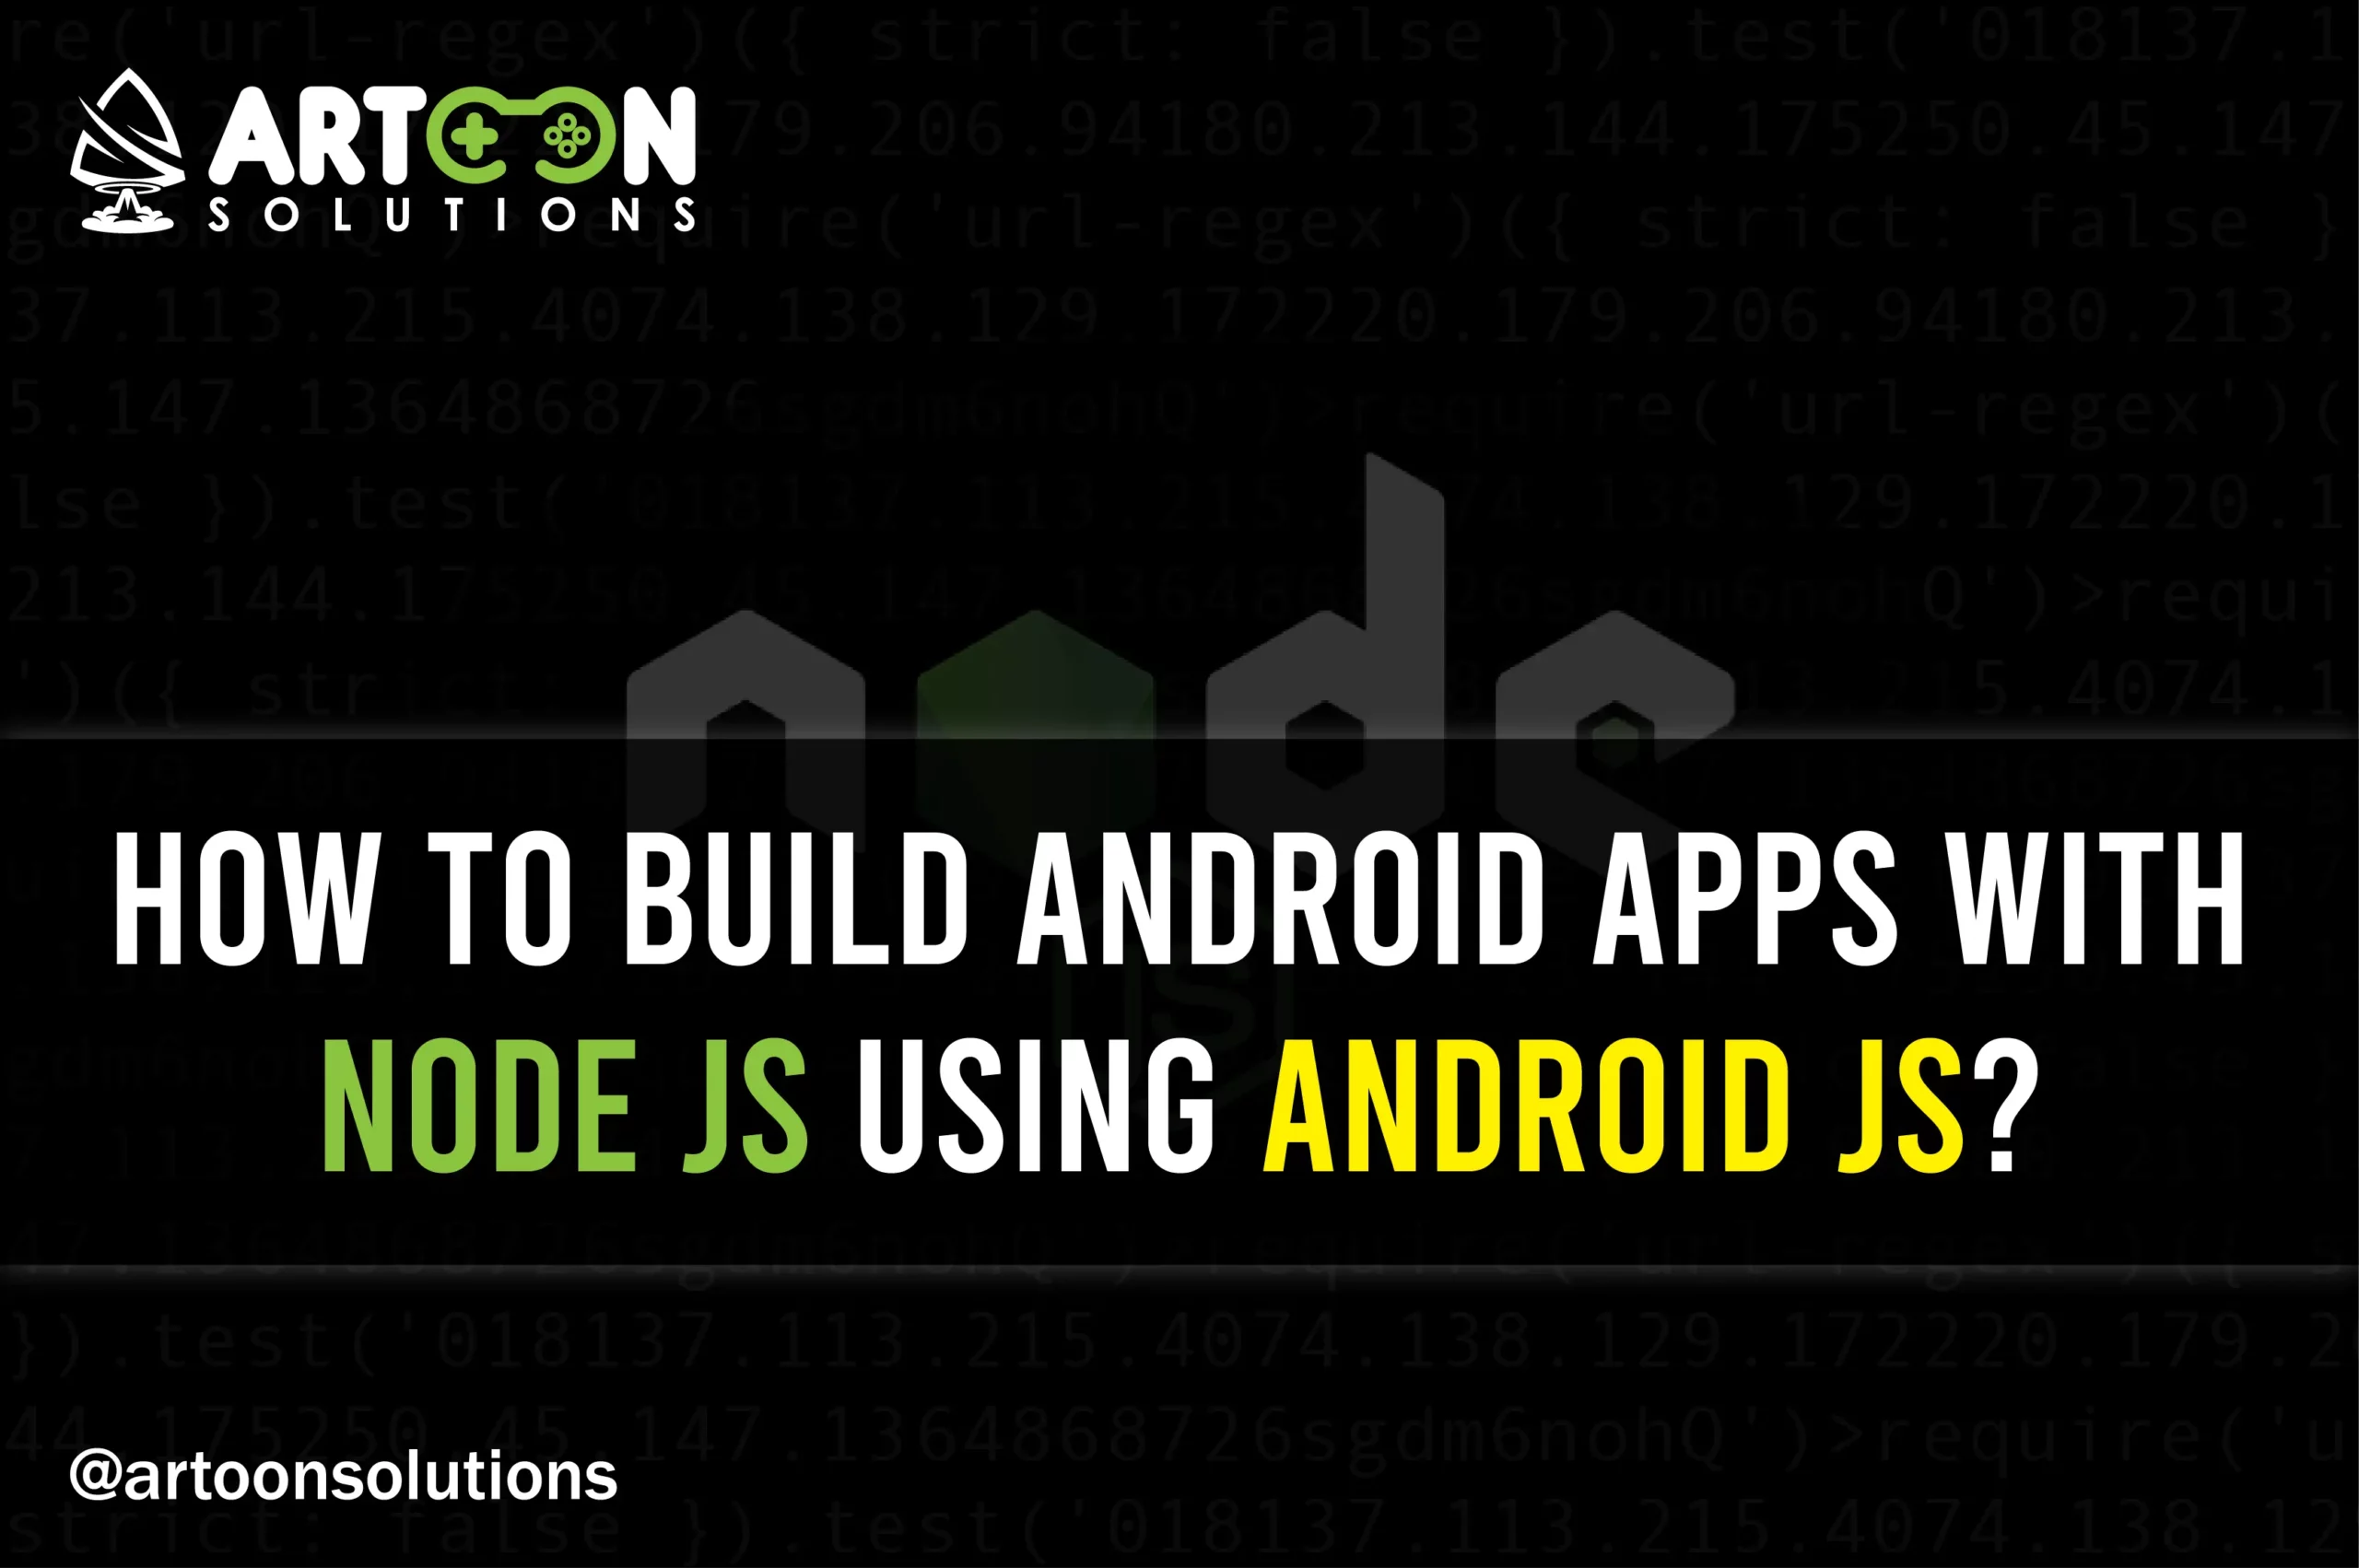 Create Android Apps With Node JS Using Android JS?